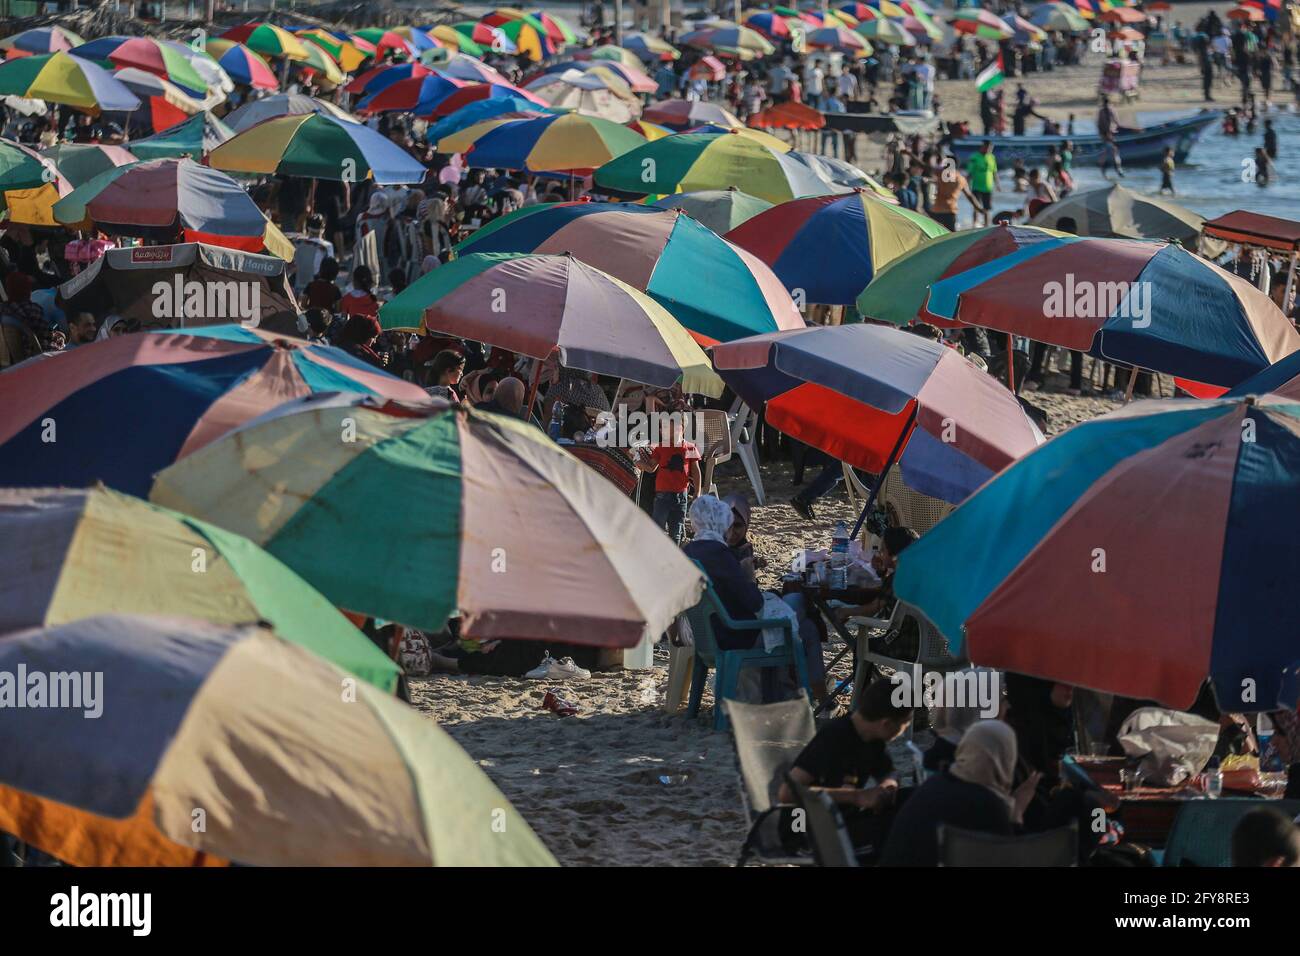 Gaza City, Palestinian Territories. 27th May, 2021. Palestinians sit under umbrellas along the shores of the Mediterranean, as life begins to return to normalcy, after a ceasefire was reached last week after 11 days of deadly confrontations between Israel and the Palestinian Islamist movement Hamas. Credit: Mohammed Talatene/dpa/Alamy Live News Stock Photo